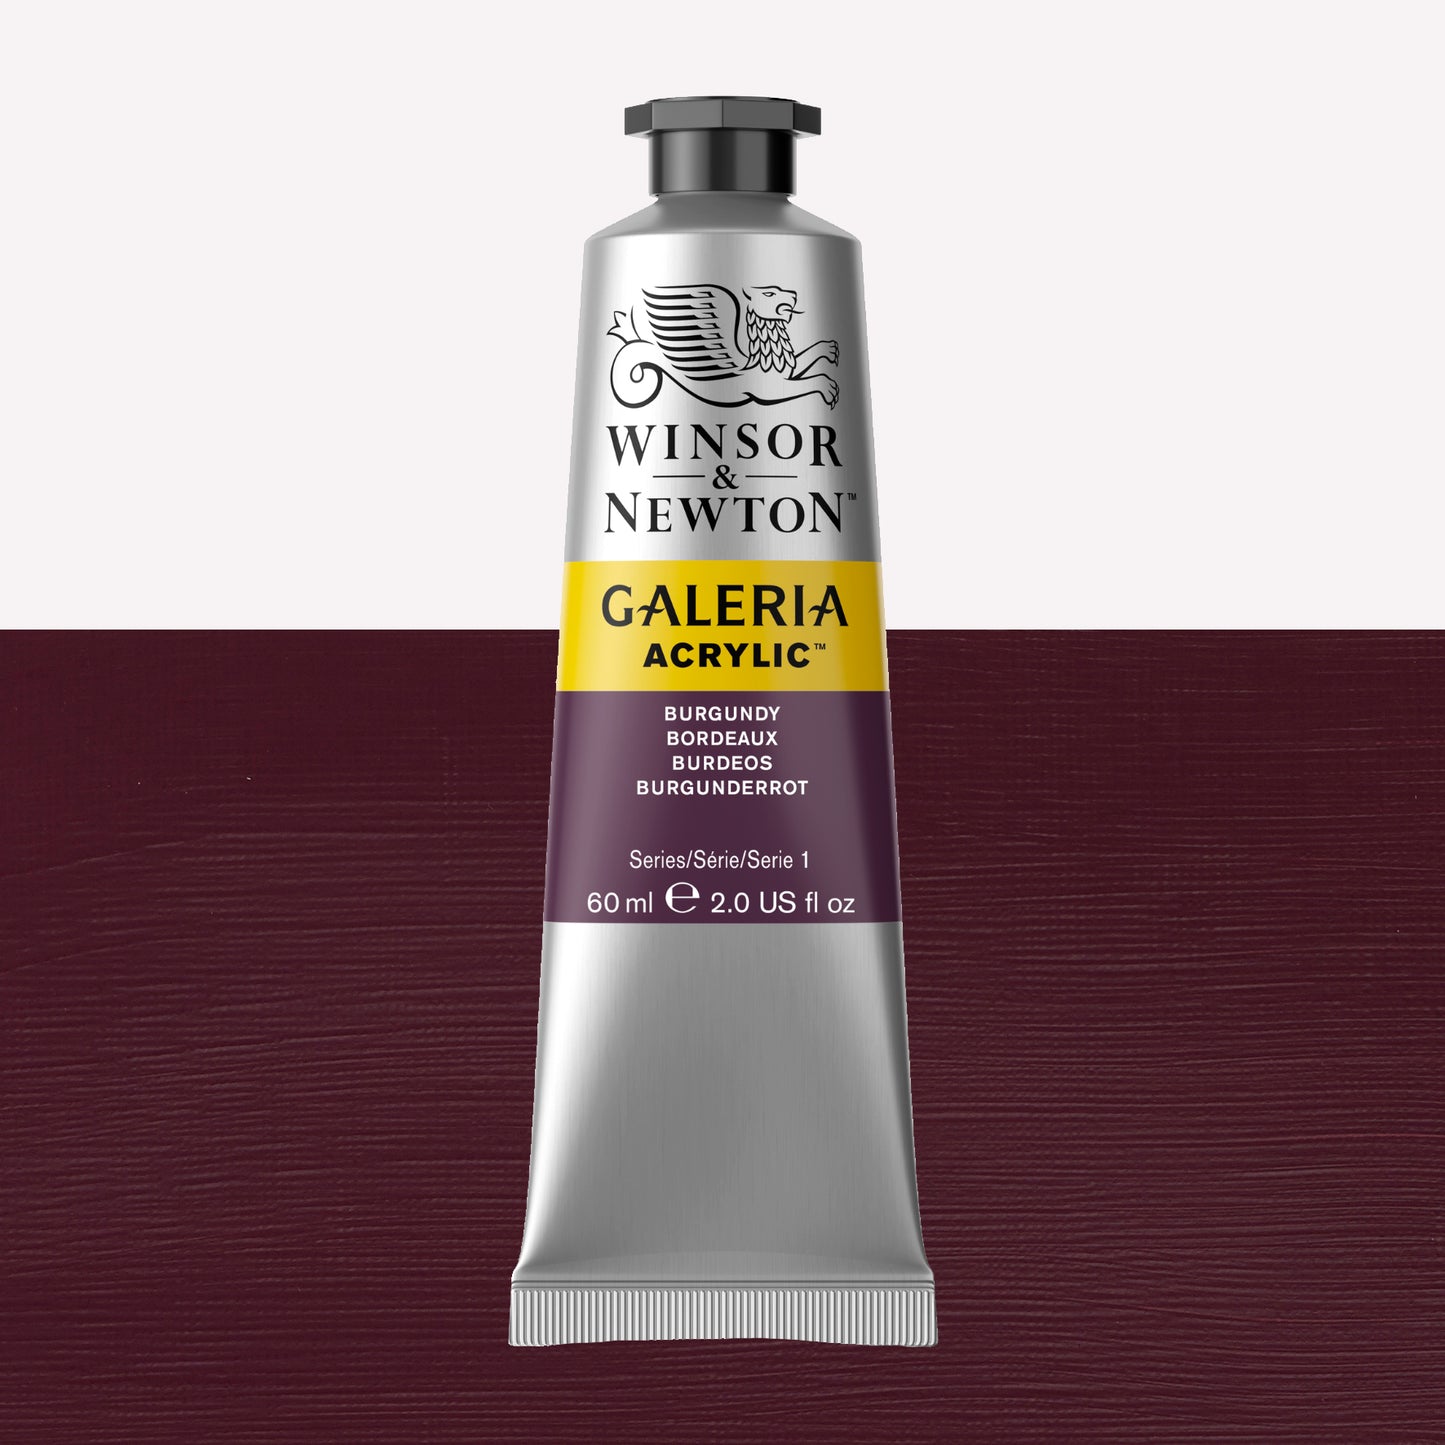 A 60ml tube of vibrant Galeria Acrylic paint in the shade Burgundy. This professional-quality paint is packaged in a silver tube with a black lid. Made by Winsor and Newton.